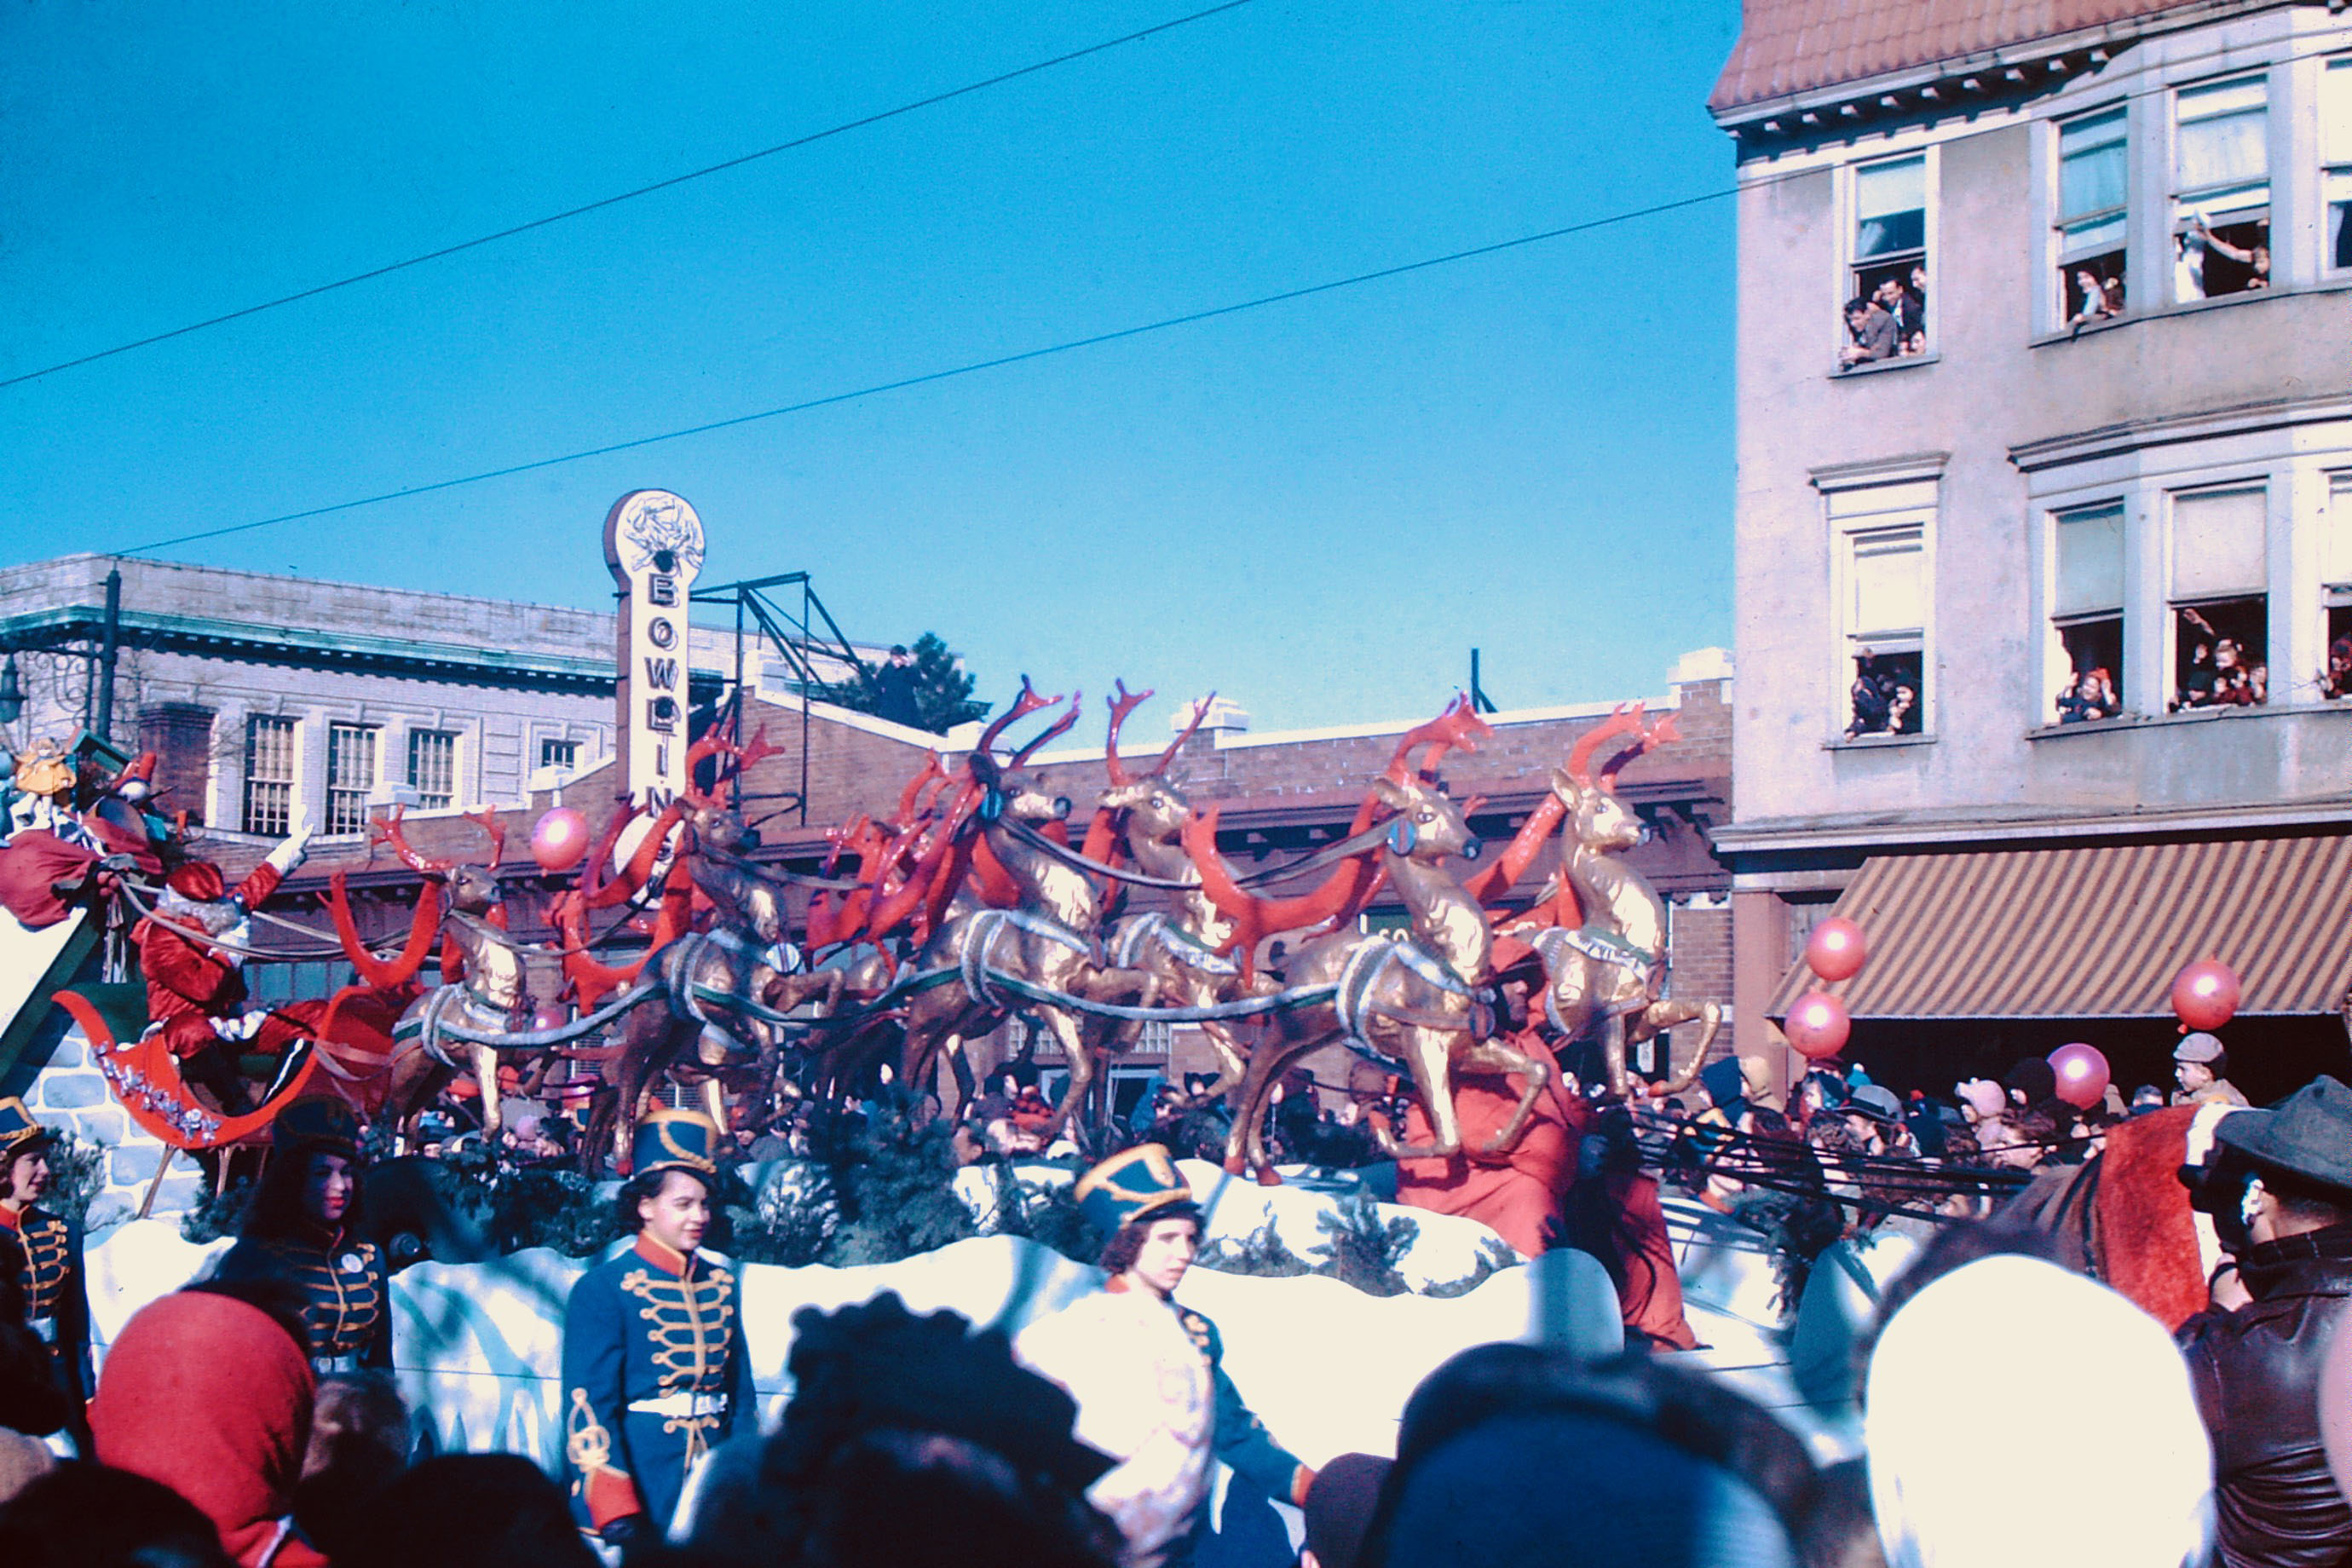 The 1946 Thanksgiving day parade in Irvington, New Jersey.